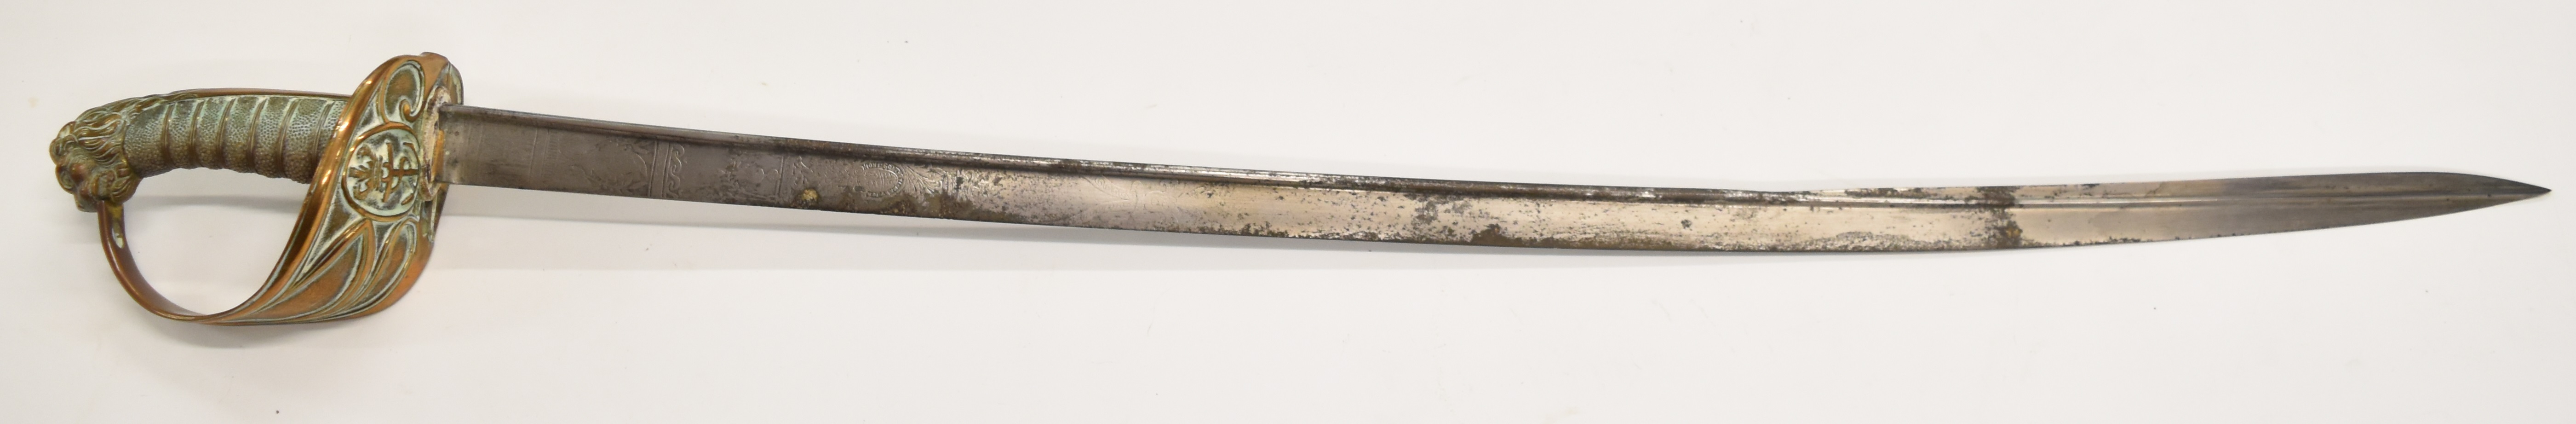 Royal Navy 1827 pattern sword with lion head pommel, folding inner guard and fouled anchor motif, - Image 3 of 11